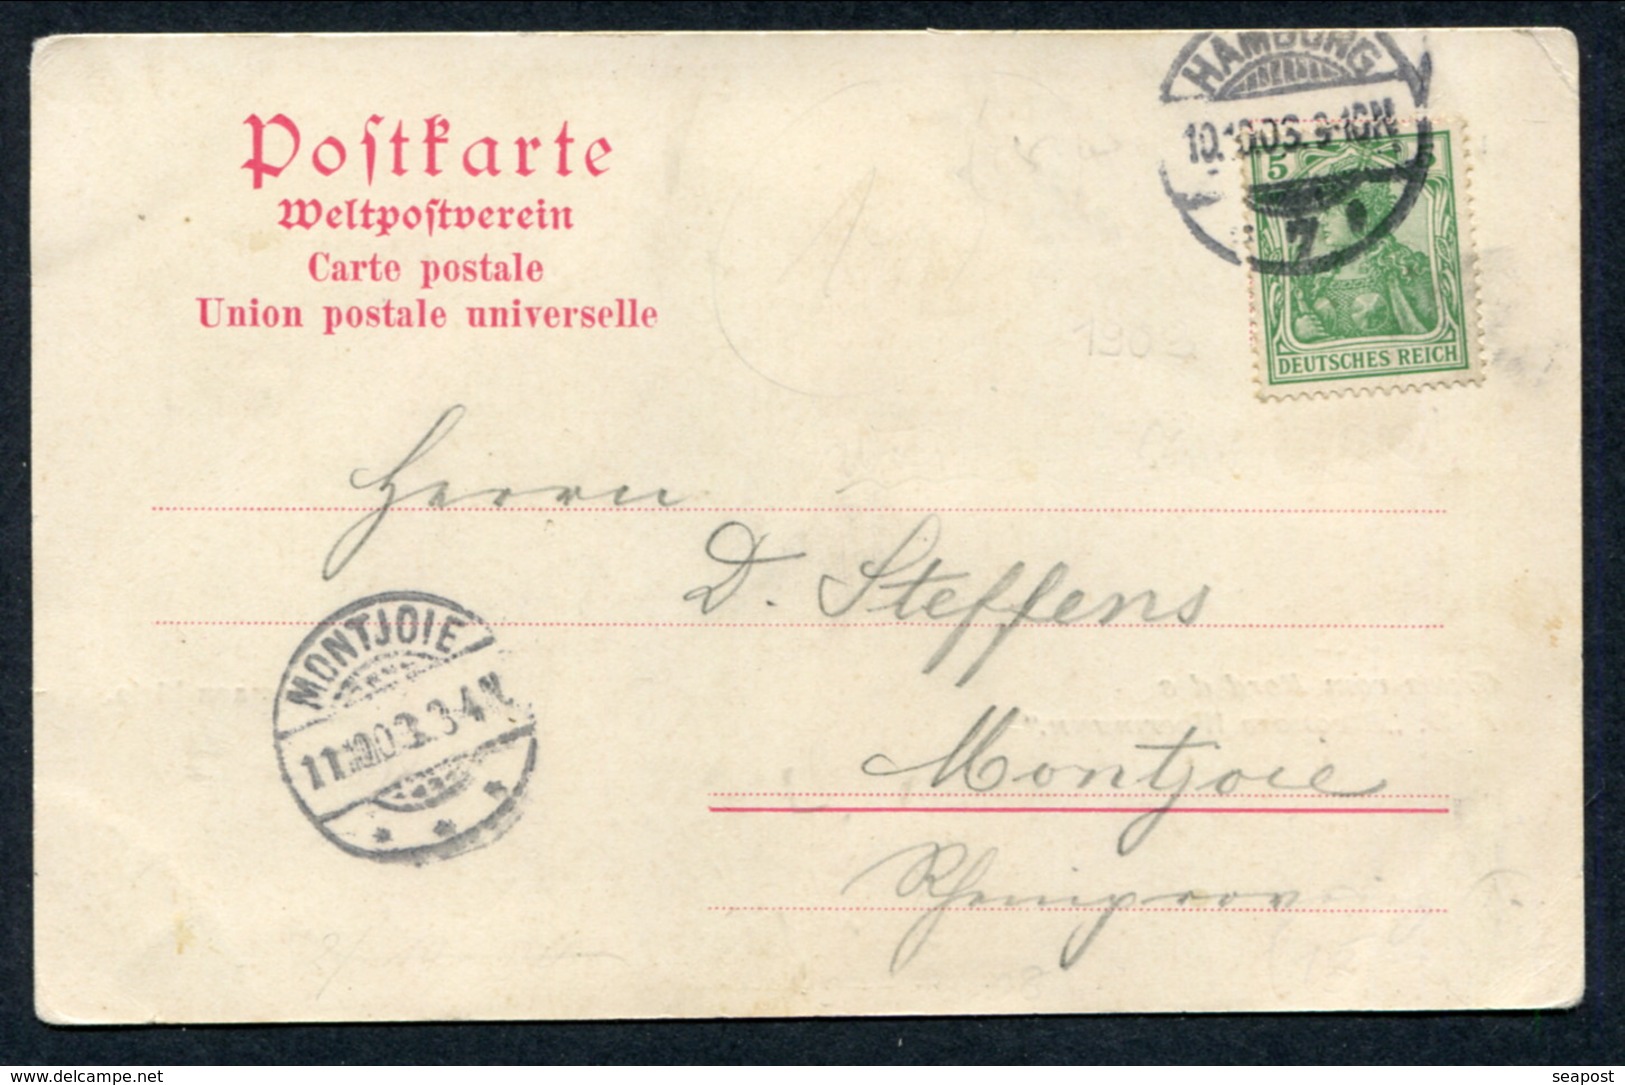 1903 USED PC -- GRUS VOM BORD DES P.D. "ELEONORE WOERMANN" - Steamers